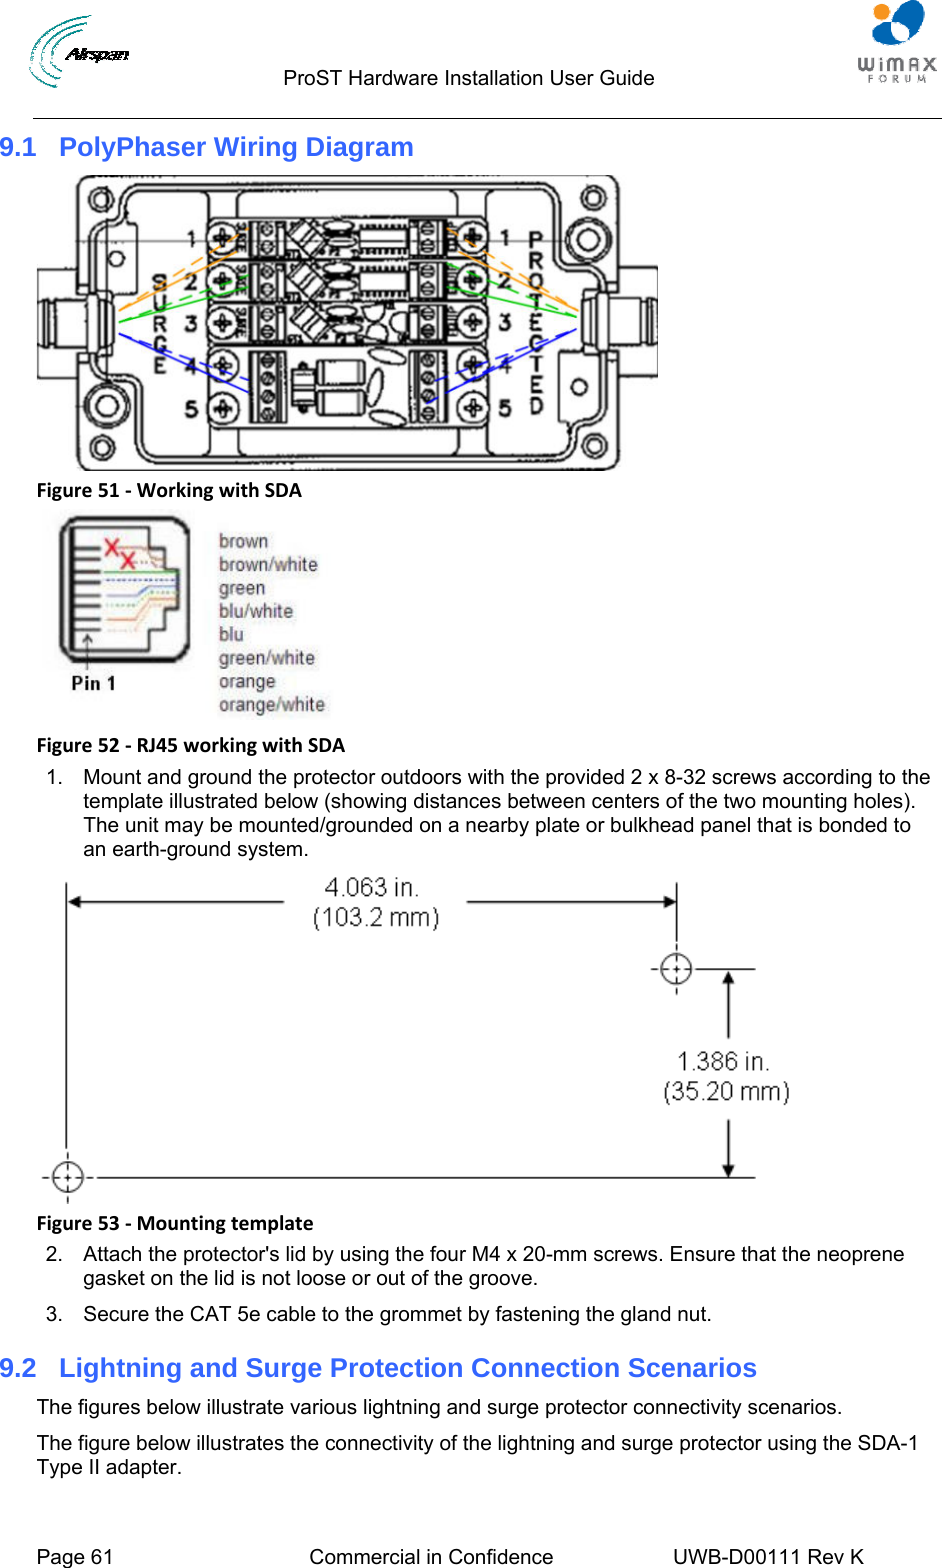                                  ProST Hardware Installation User Guide  Page 61  Commercial in Confidence  UWB-D00111 Rev K   9.1  PolyPhaser Wiring Diagram  Figure51‐WorkingwithSDA Figure52‐RJ45workingwithSDA1.  Mount and ground the protector outdoors with the provided 2 x 8-32 screws according to the template illustrated below (showing distances between centers of the two mounting holes). The unit may be mounted/grounded on a nearby plate or bulkhead panel that is bonded to an earth-ground system.  Figure53‐Mountingtemplate2.  Attach the protector&apos;s lid by using the four M4 x 20-mm screws. Ensure that the neoprene gasket on the lid is not loose or out of the groove. 3.  Secure the CAT 5e cable to the grommet by fastening the gland nut. 9.2  Lightning and Surge Protection Connection Scenarios The figures below illustrate various lightning and surge protector connectivity scenarios. The figure below illustrates the connectivity of the lightning and surge protector using the SDA-1 Type II adapter. 